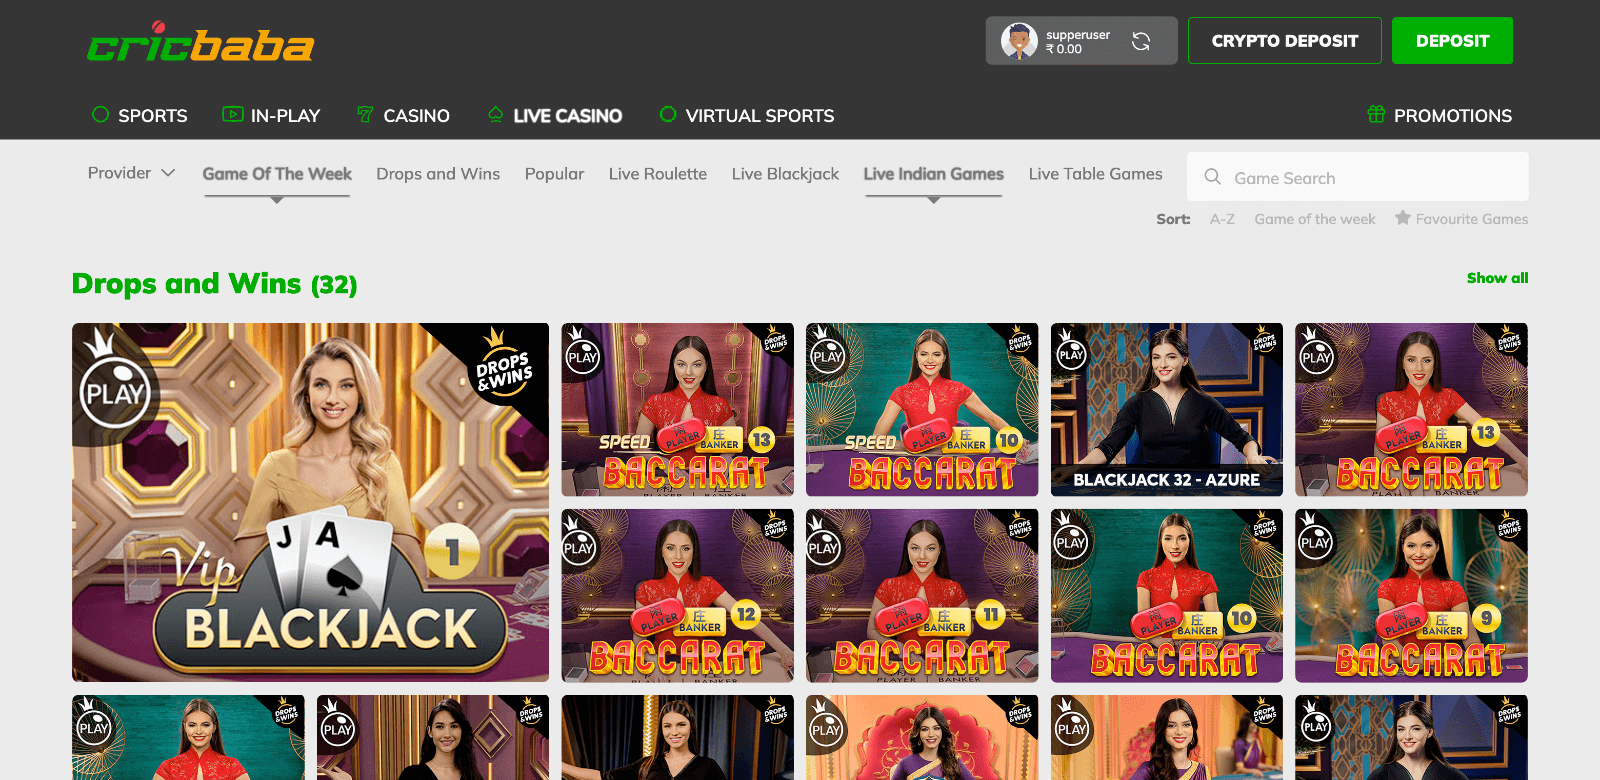 Live casino section at Cricbaba with live dealers